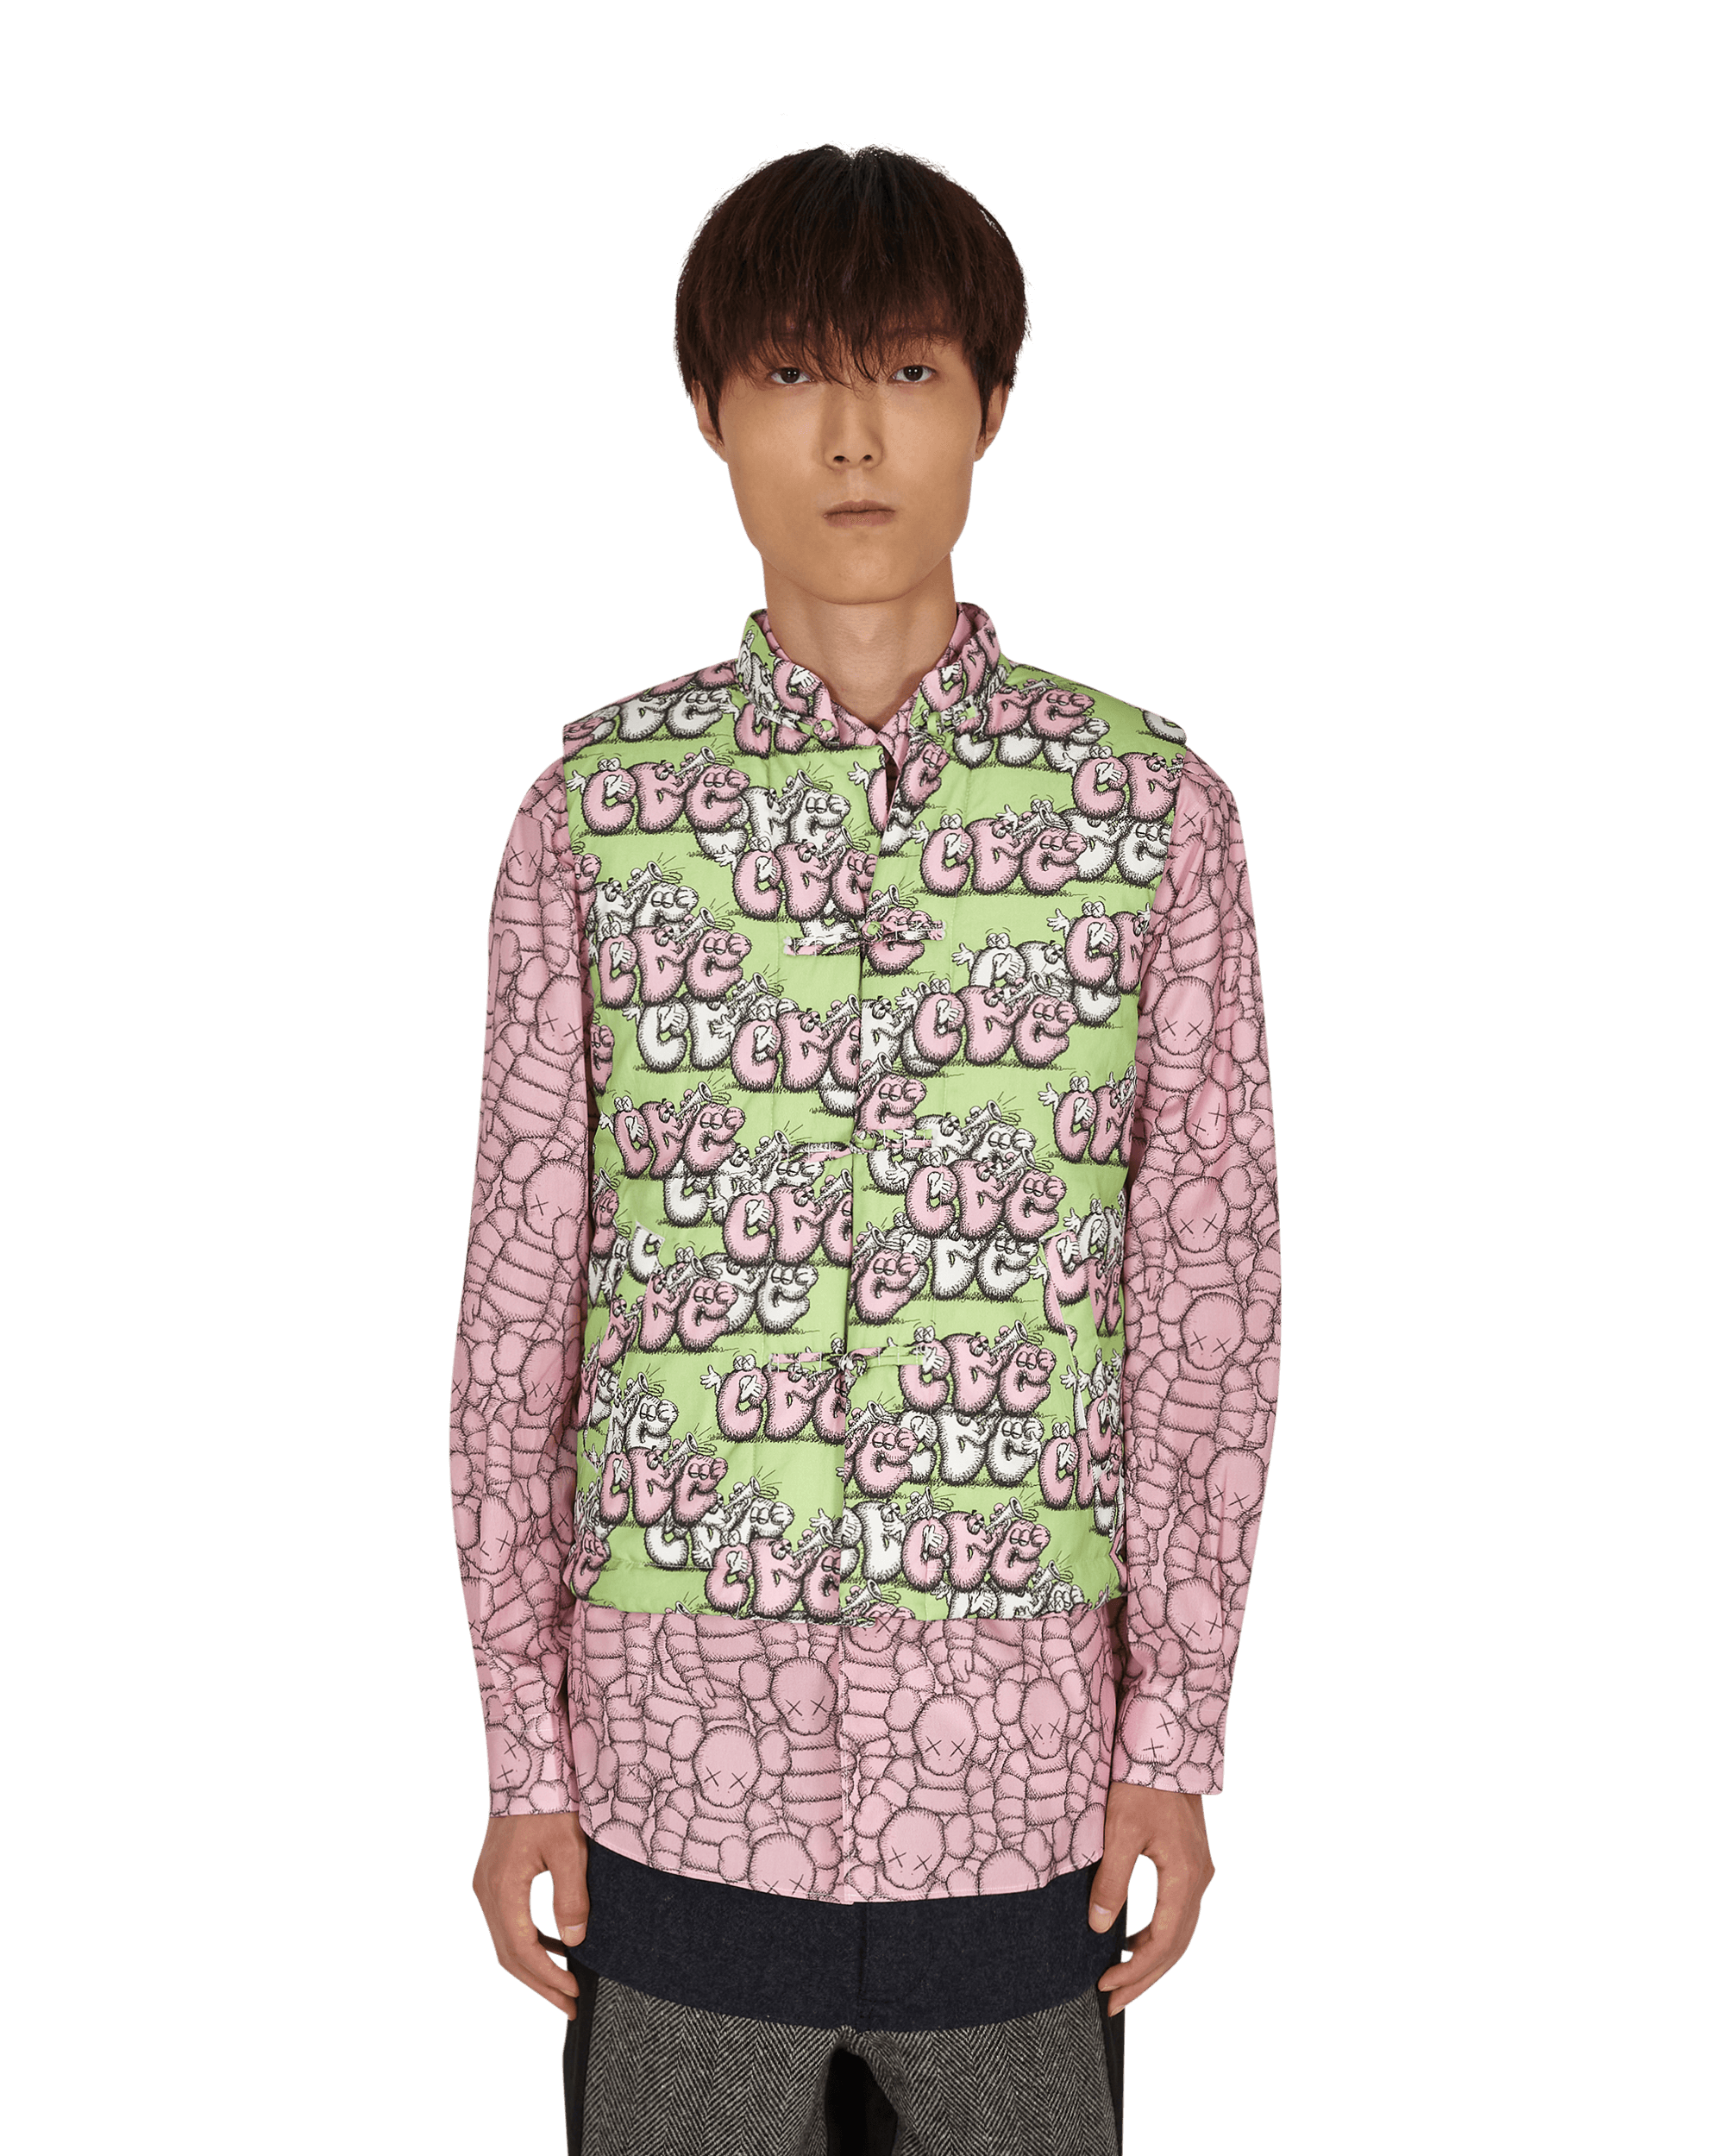 Comme Des Garcons Shirt Woven Print G/B Coats and Jackets Jackets FH-J007-W21 1